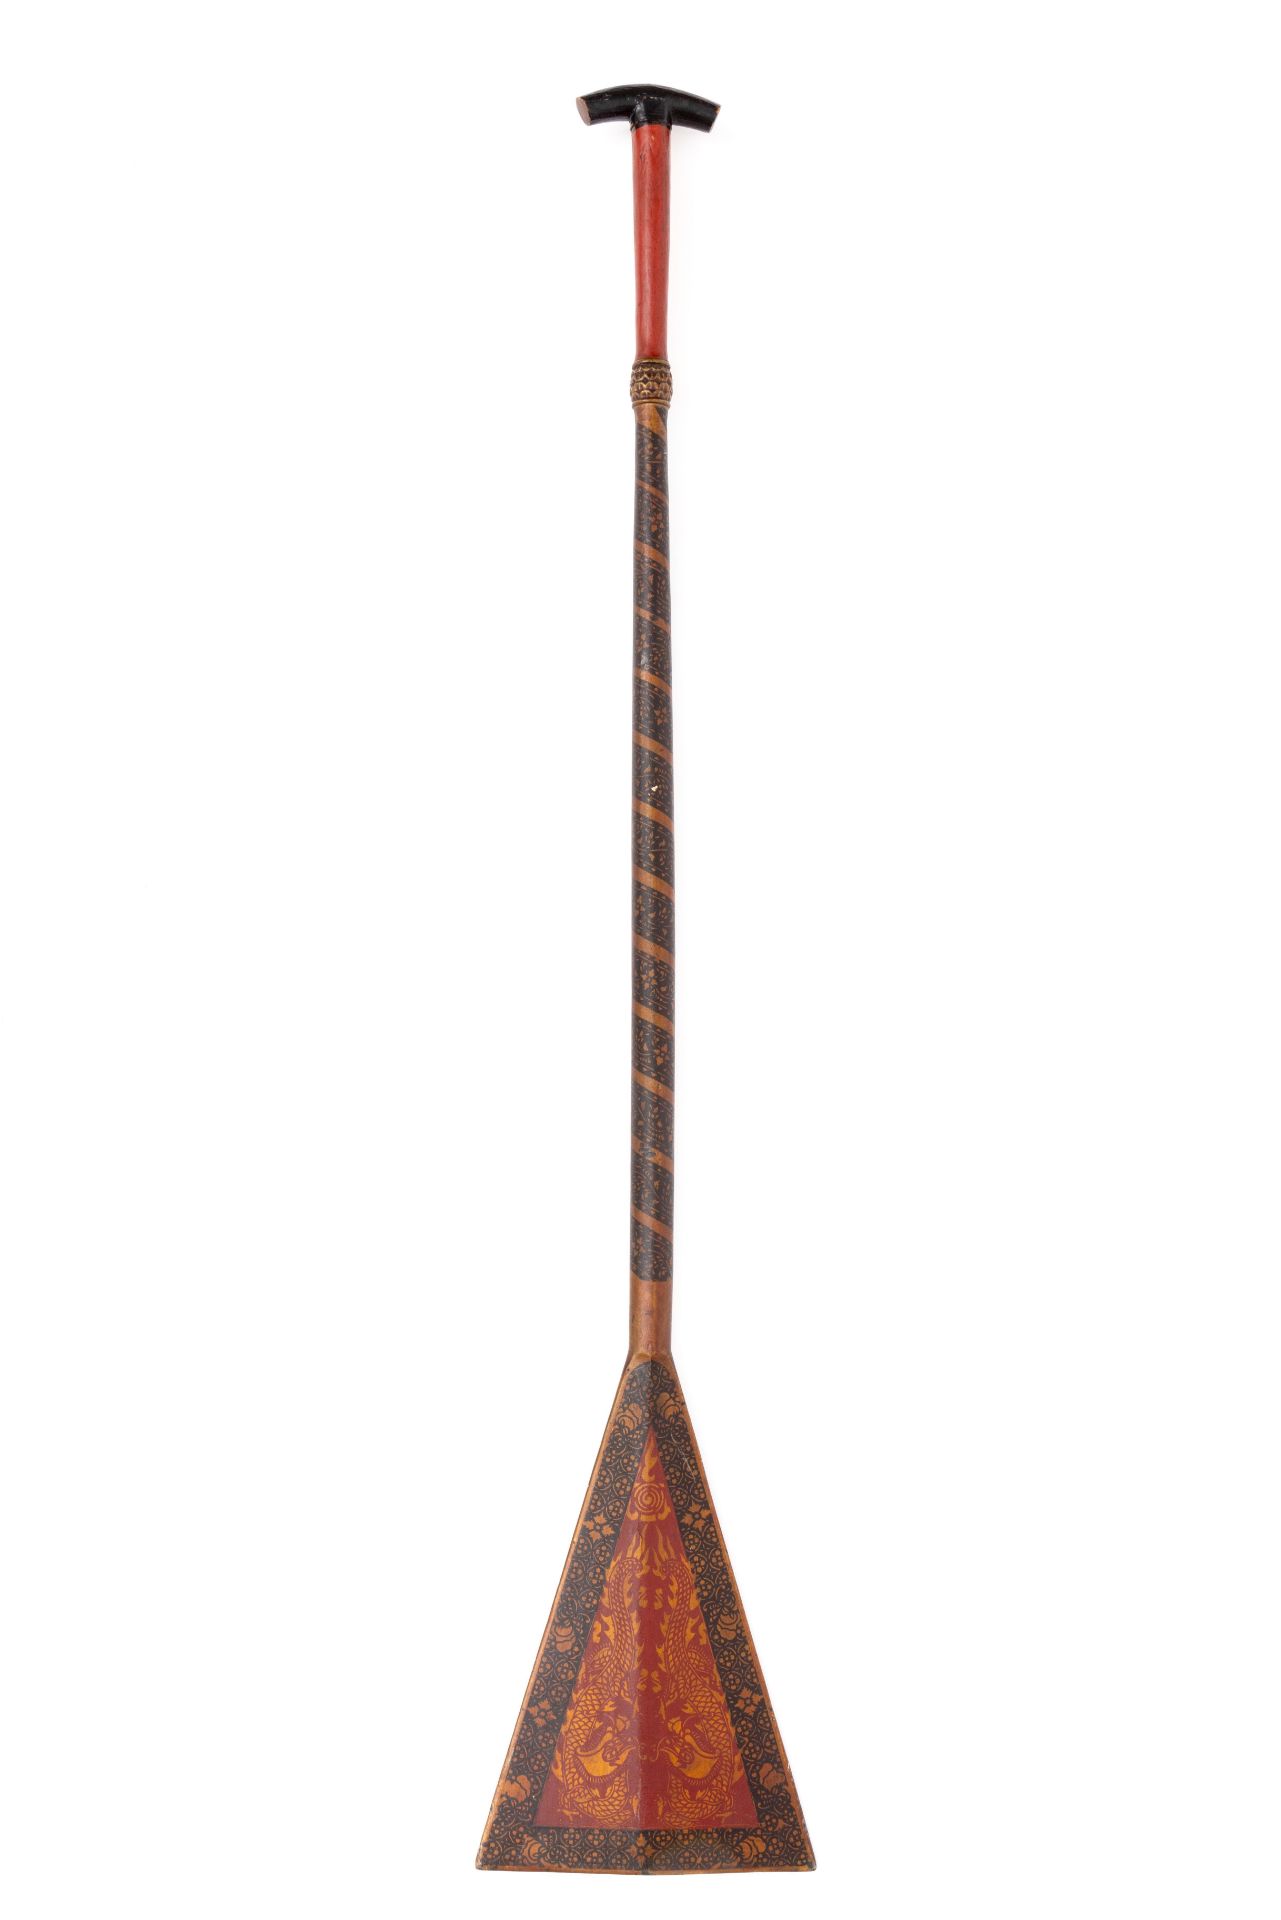 Sumatra, a painted and lacquered ceremonial peddel.